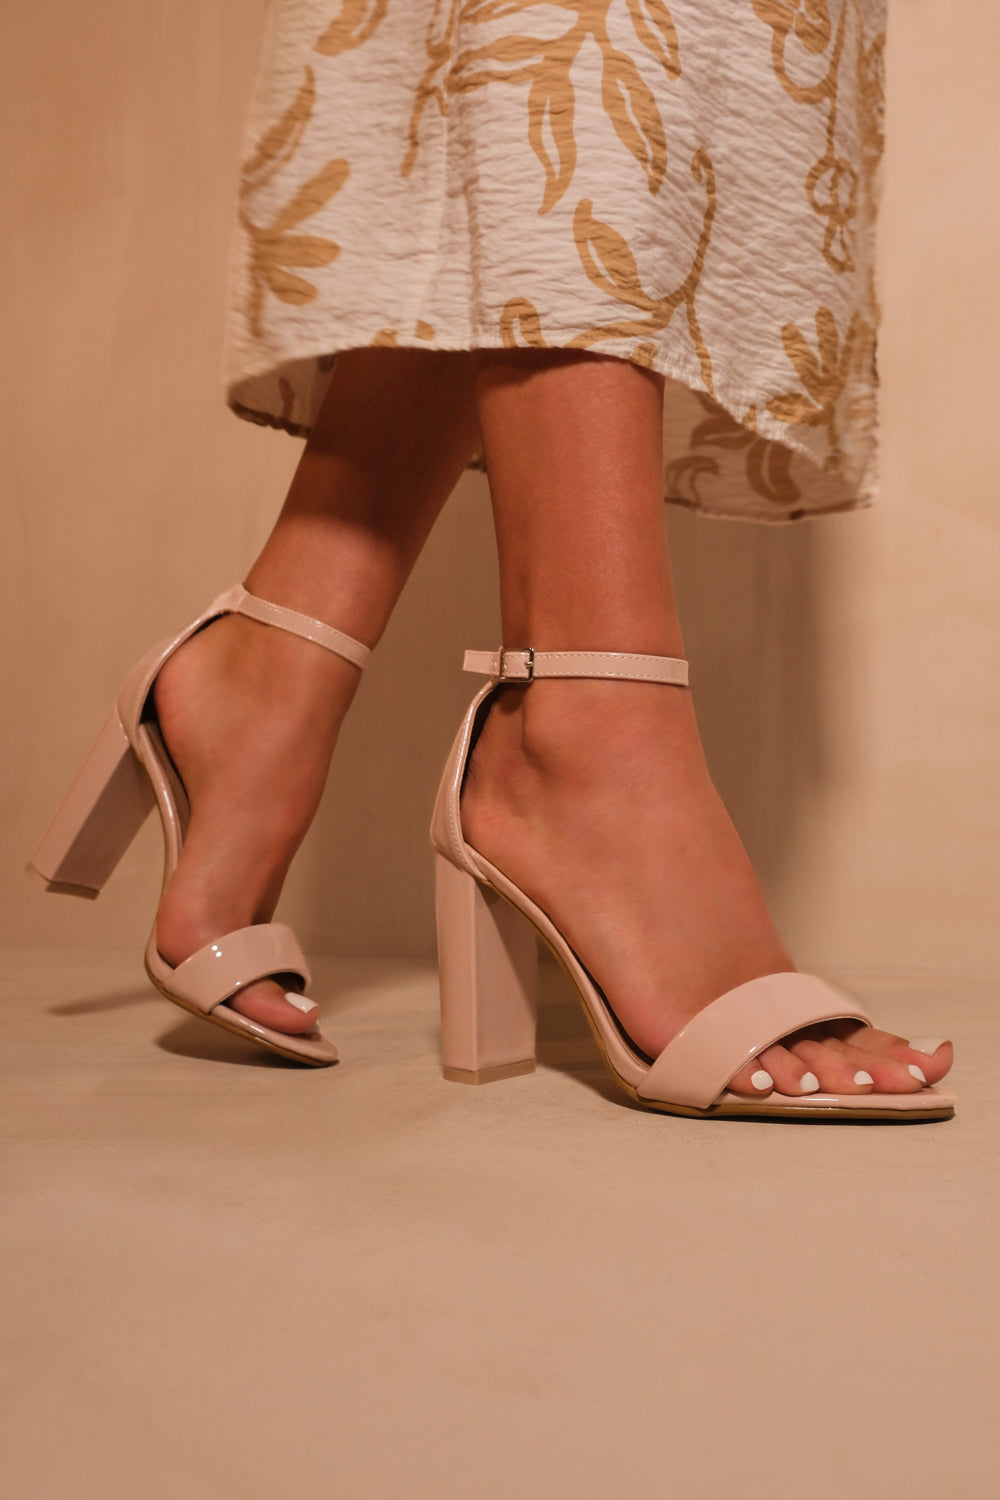 SKYE STRAPPY BLOCK HEELS WITH BUCKLE IN NUDE PATENT